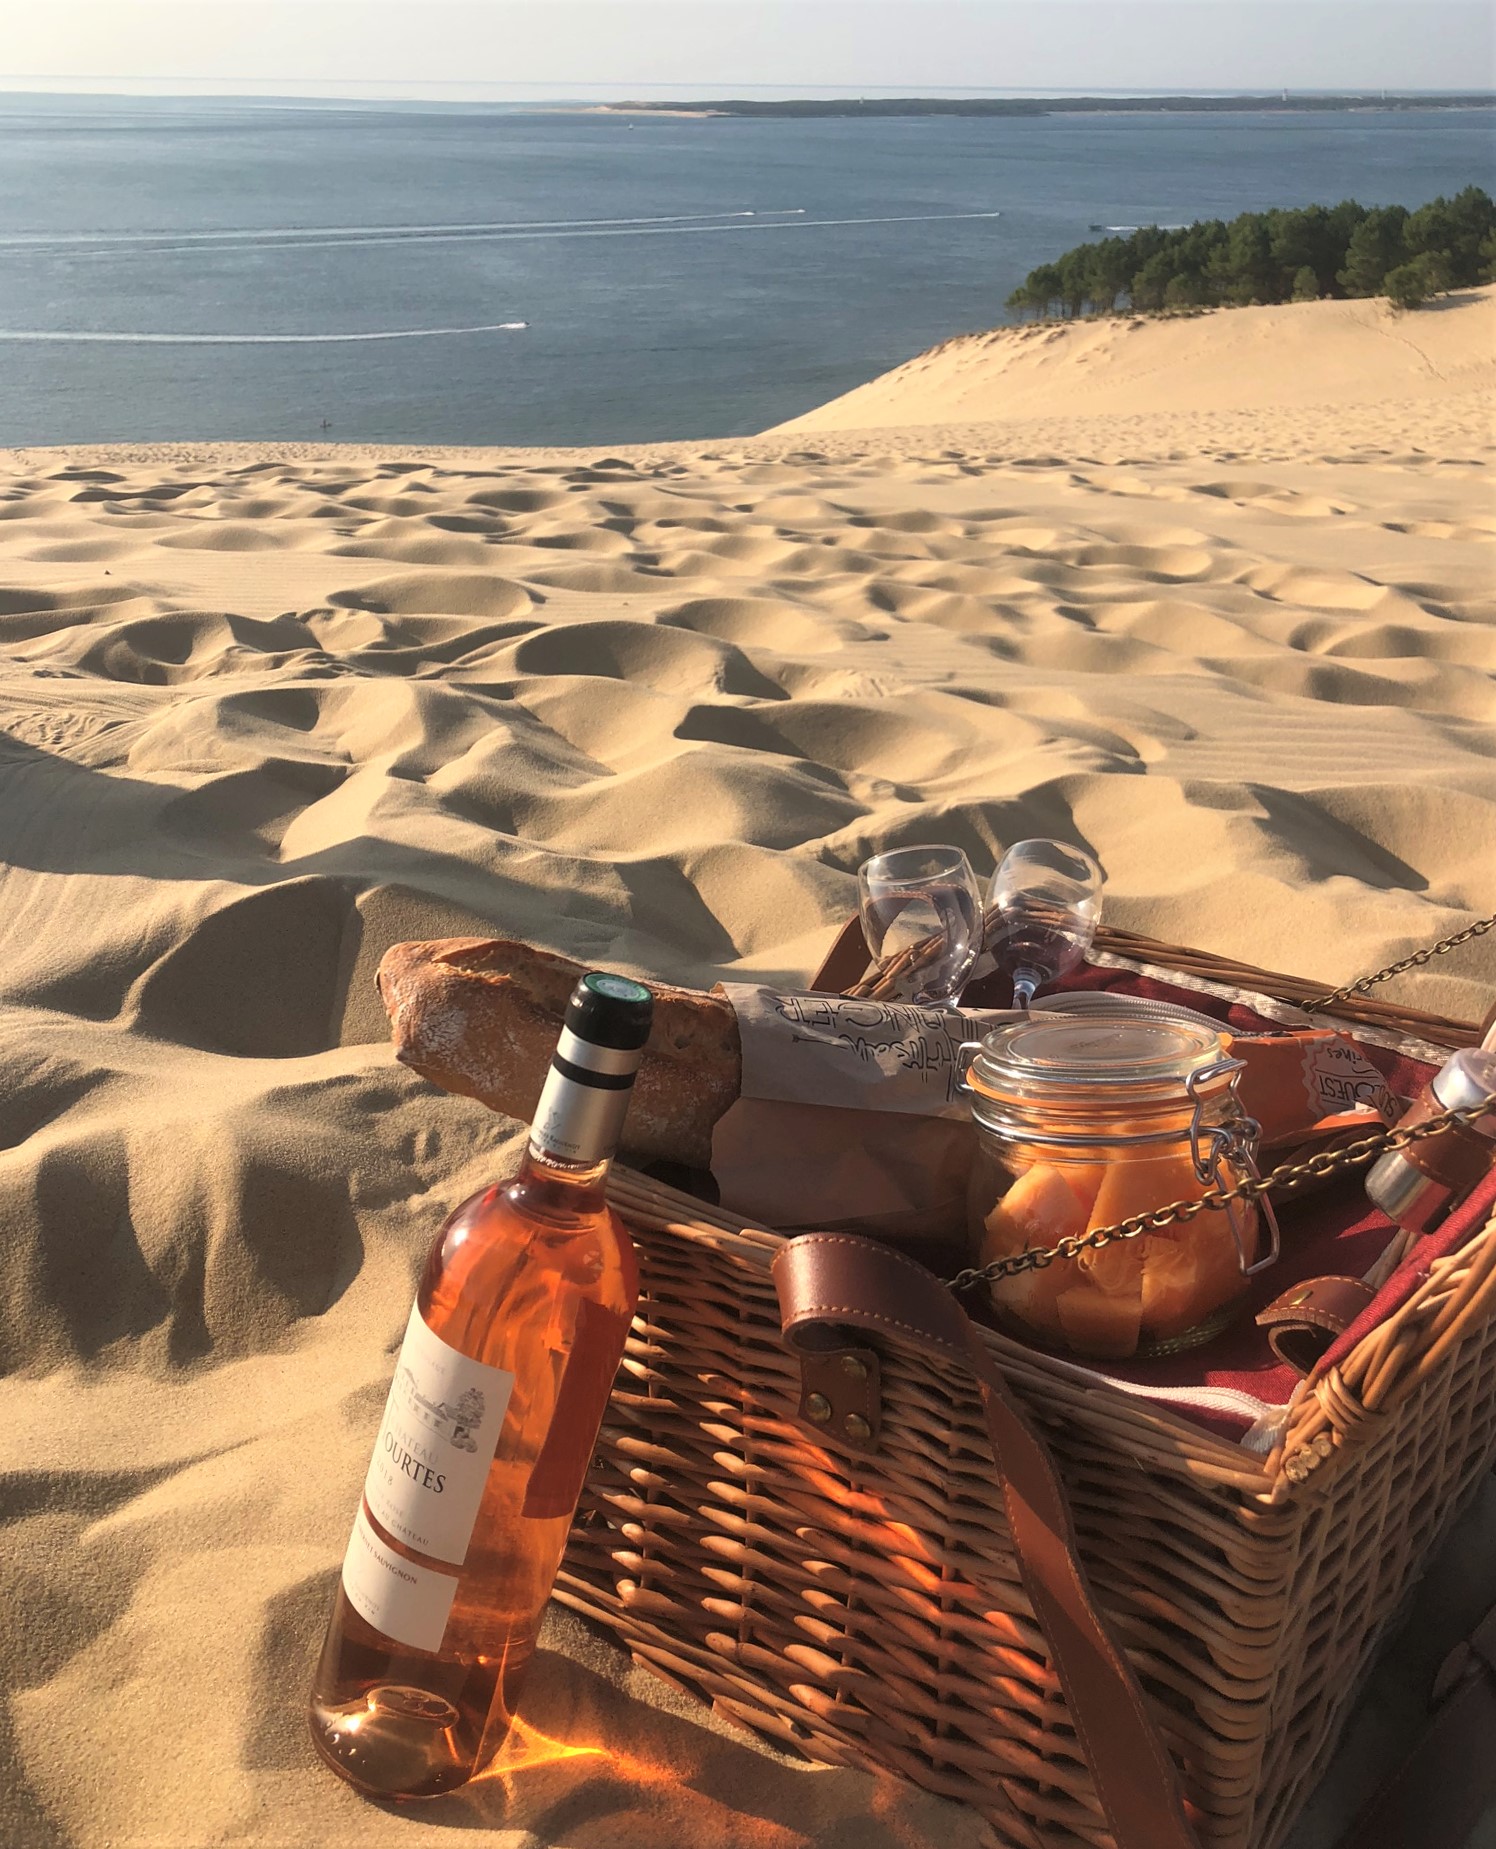 Picnic with local delicacies in a remarkable setting